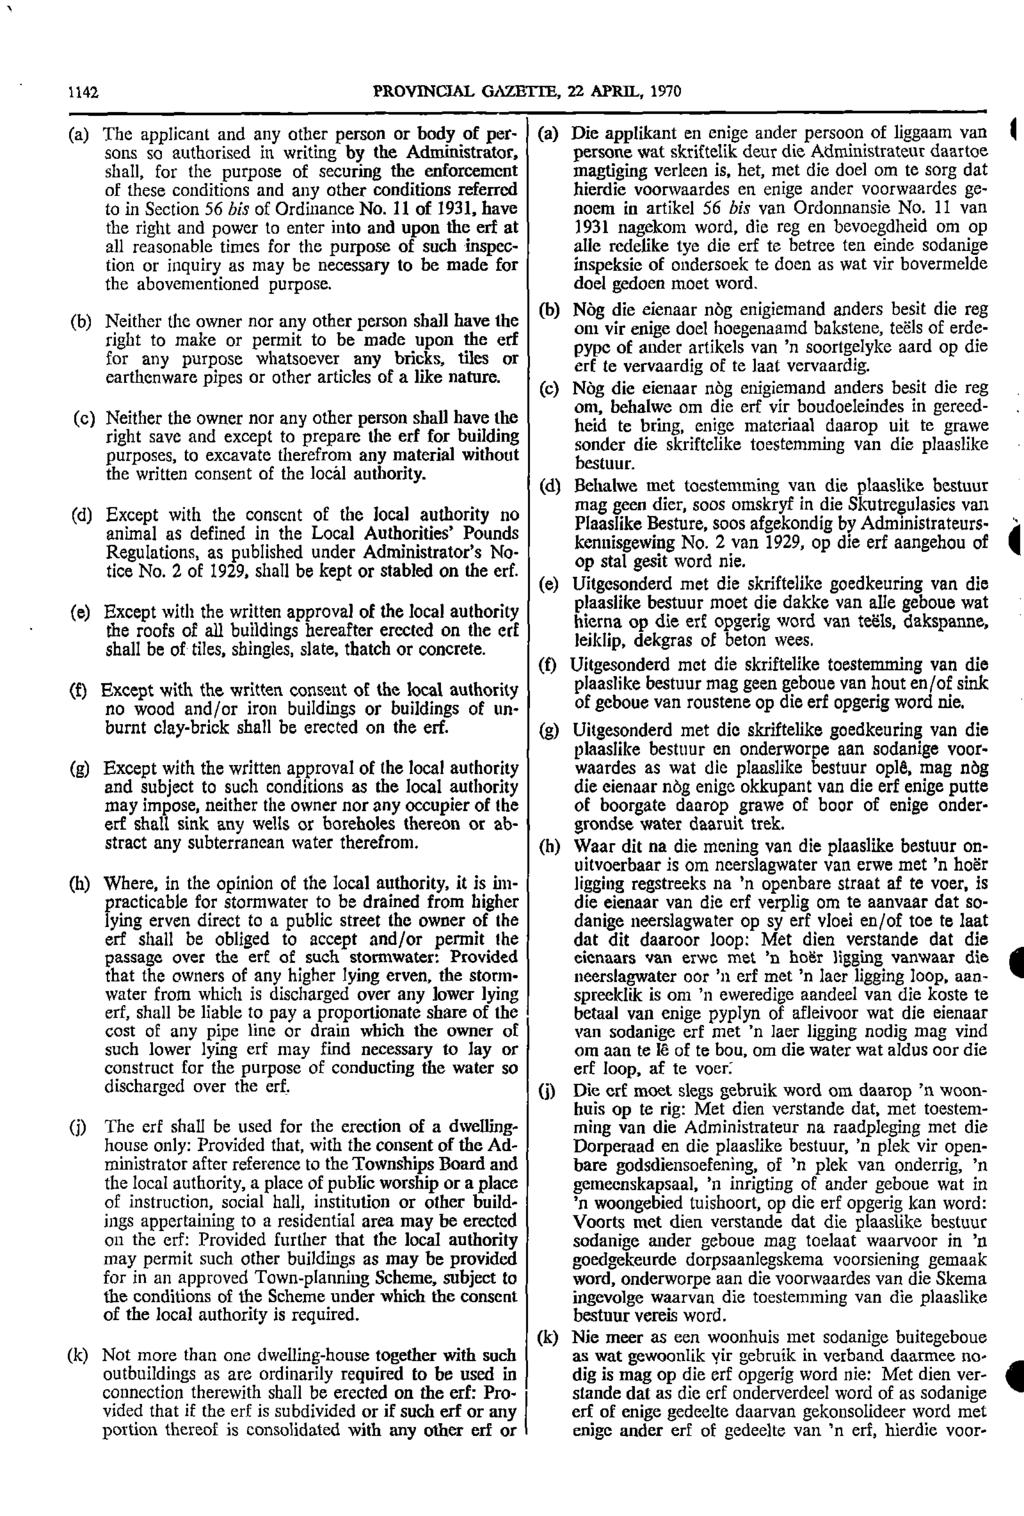 1142 PROVINCIAL GAZETTE 22 APRIL 1970 (a) The applicant and any other person or body of per (a) Die applikant en enige ander persoon of liggaam van sons so authorised in writing by the Administrator